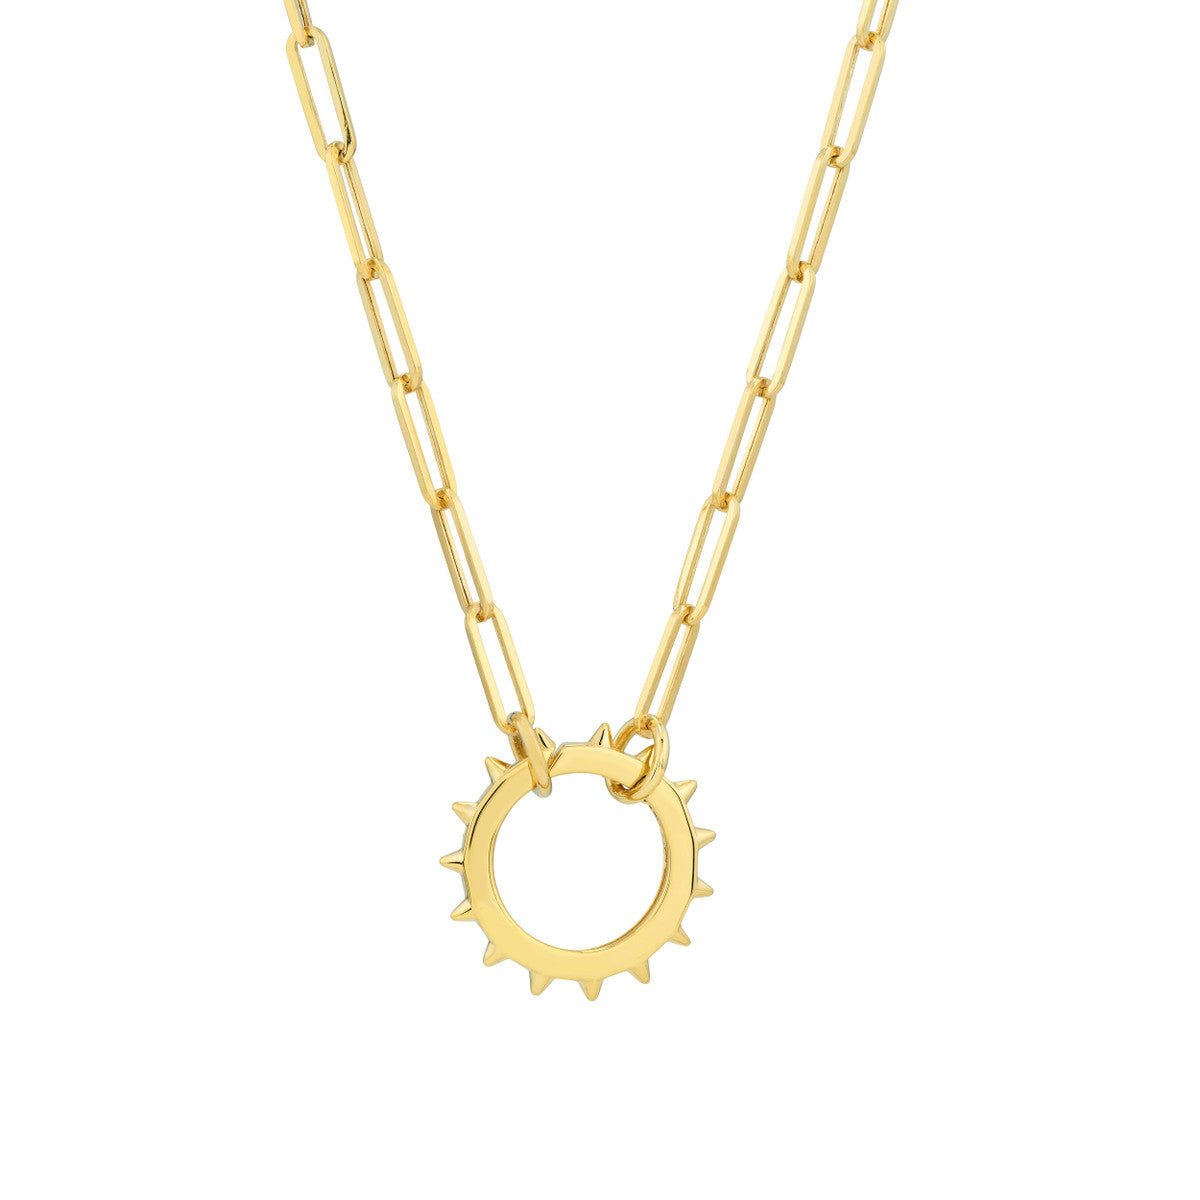 Round Spiked Push Lock Pendant with  Rolo Chain